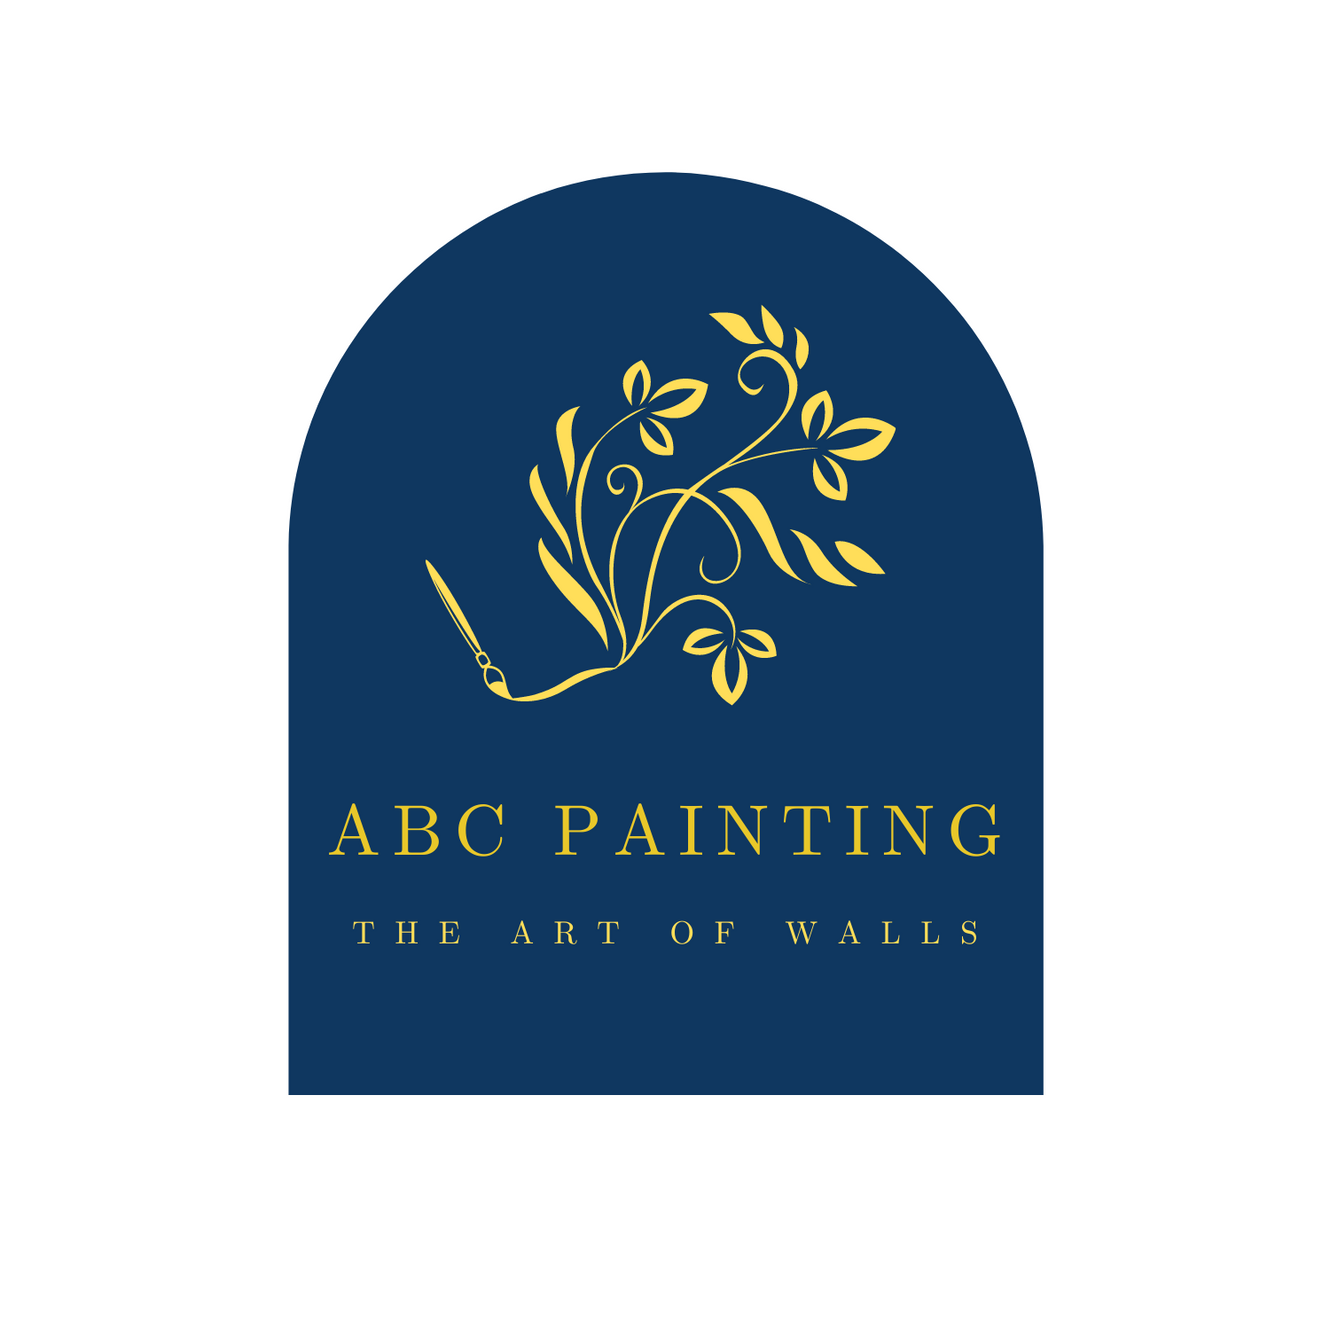 Expert Painters And Decorators Harrow | Painting And Decorating Services | ArtOfWalls